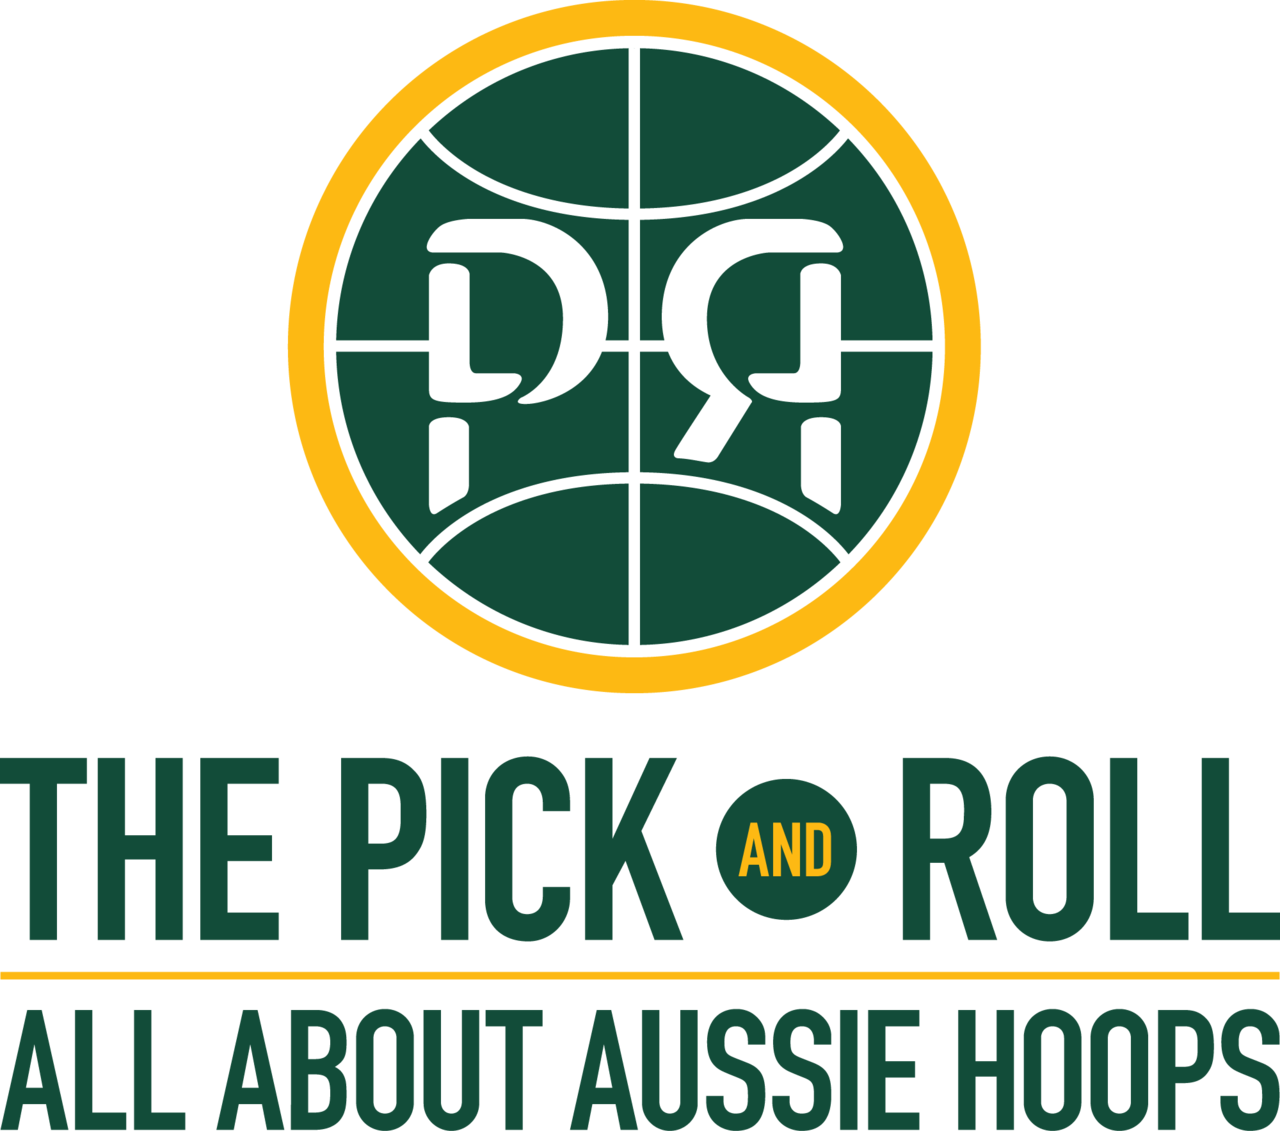 The Pick and Roll